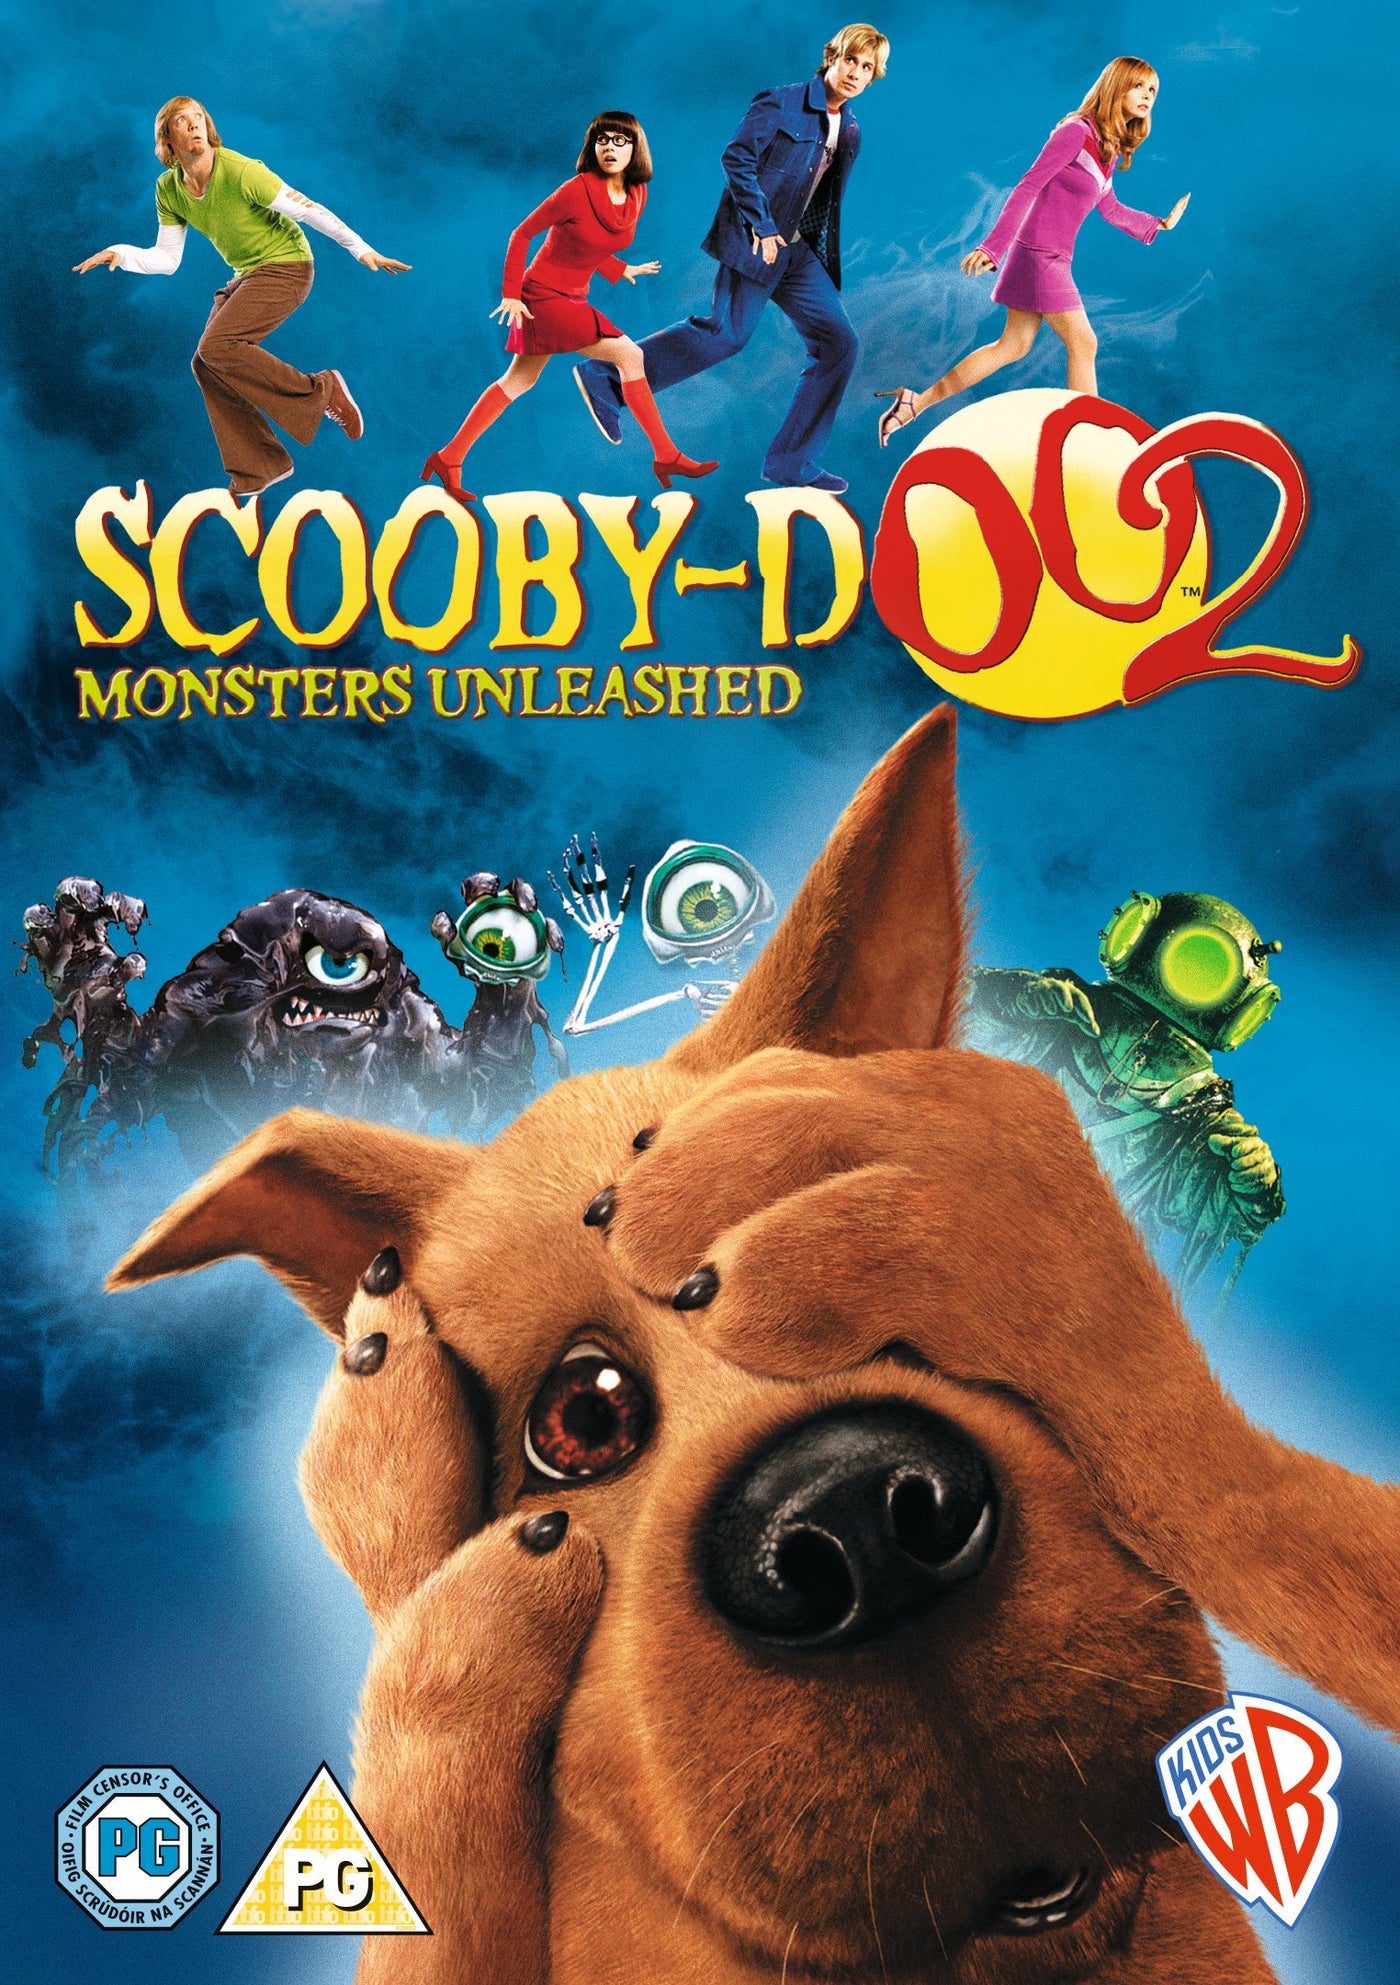 Scooby-Doo 2 - Monsters Unleashed [2004] (DVD)